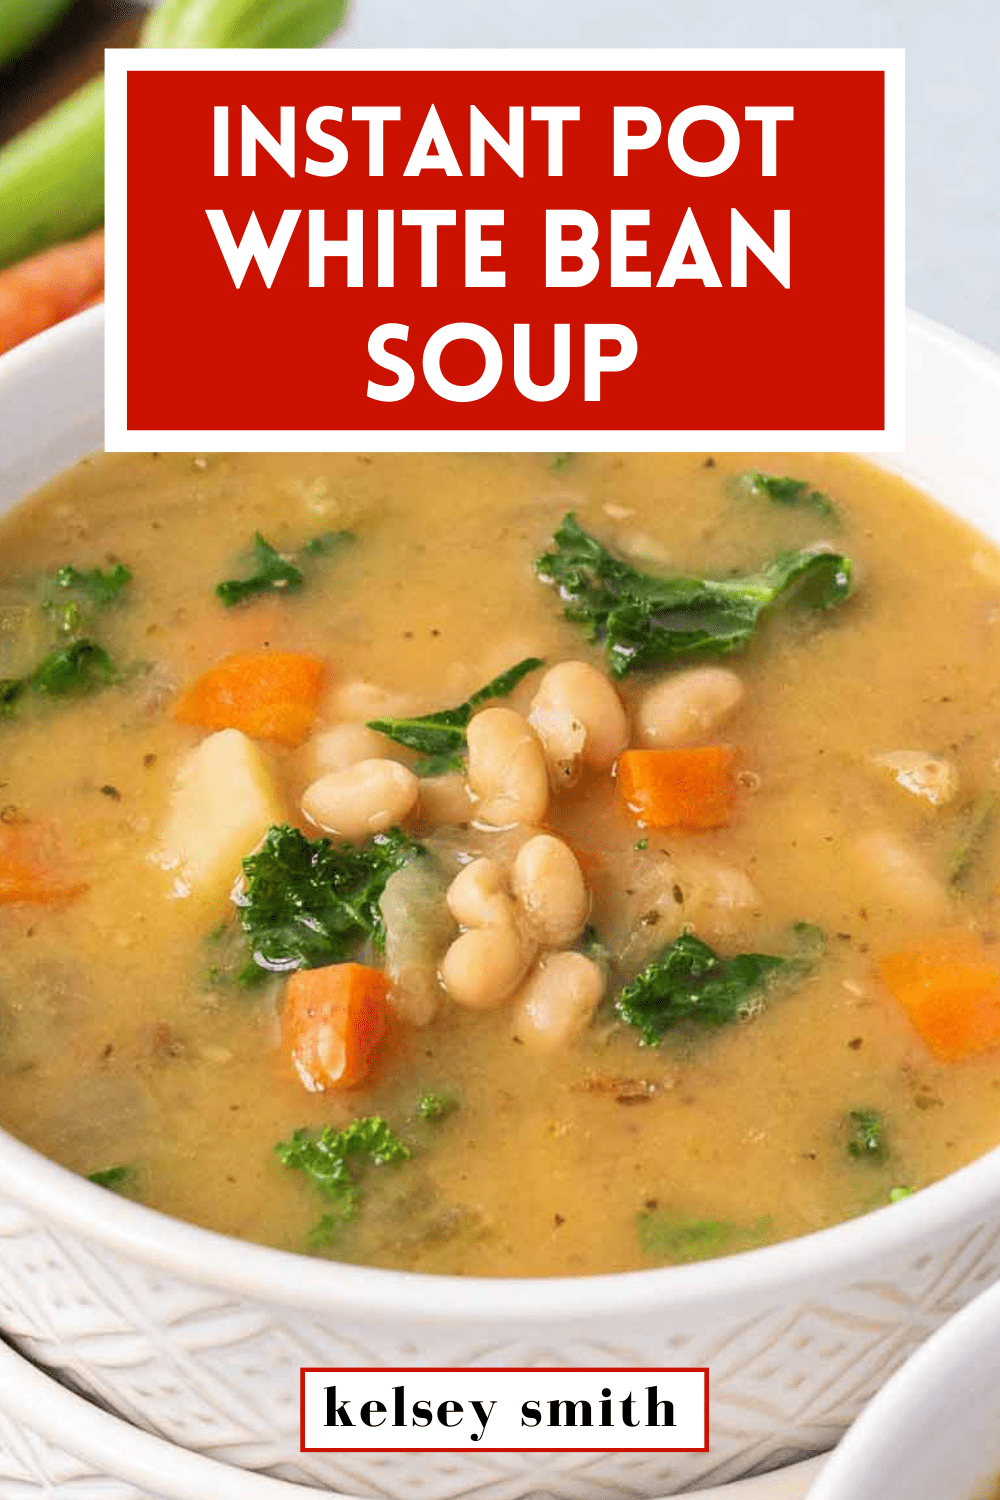 Made with dried navy beans and fresh vegetables, this creamy Instant Pot white bean soup is nutritious and budget-friendly. #vegetarian #vegan #glutenfree